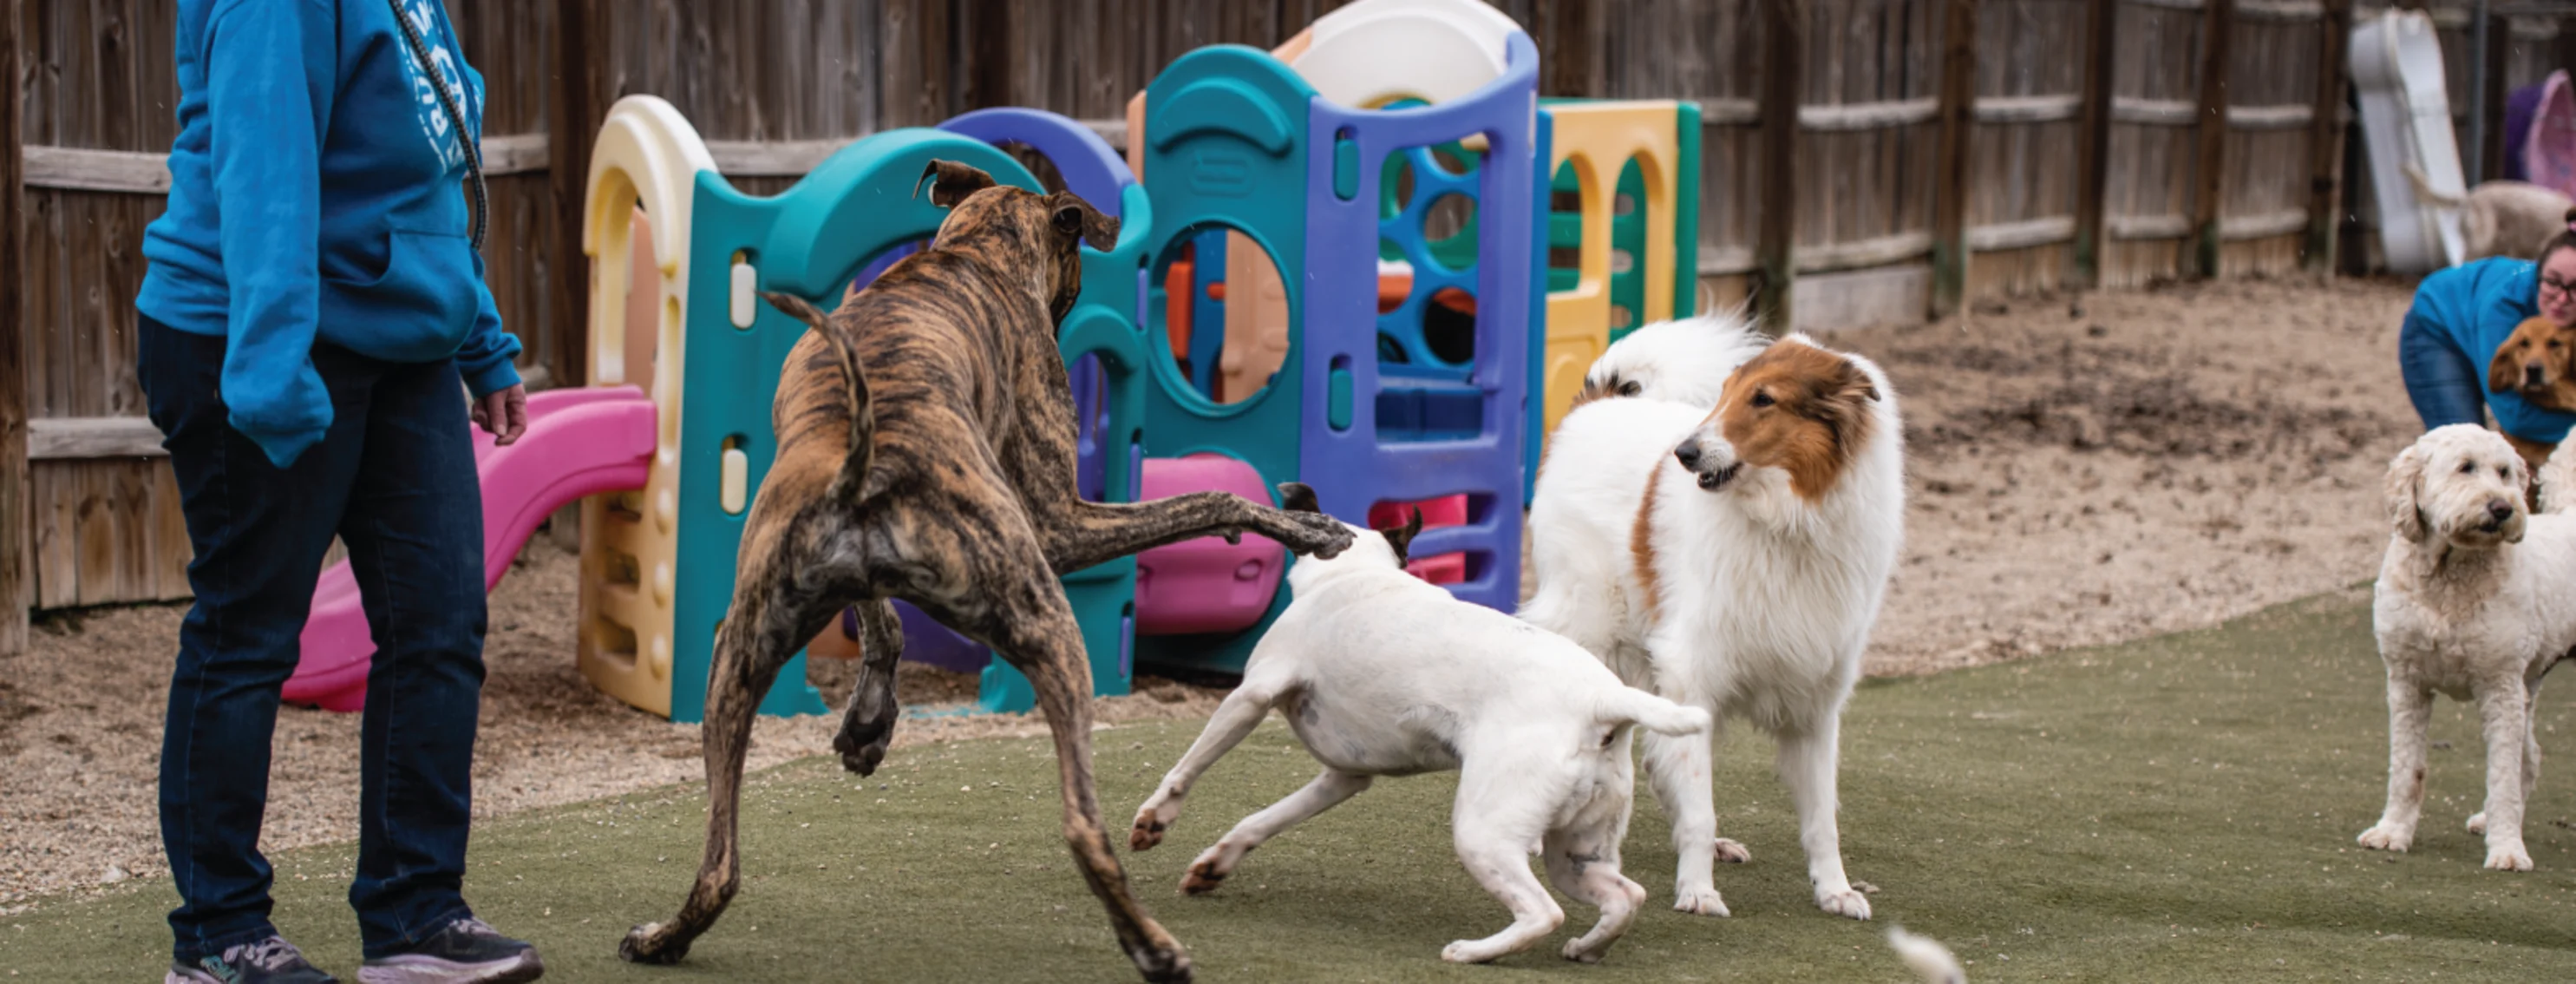 Dogs playing outside in play yard